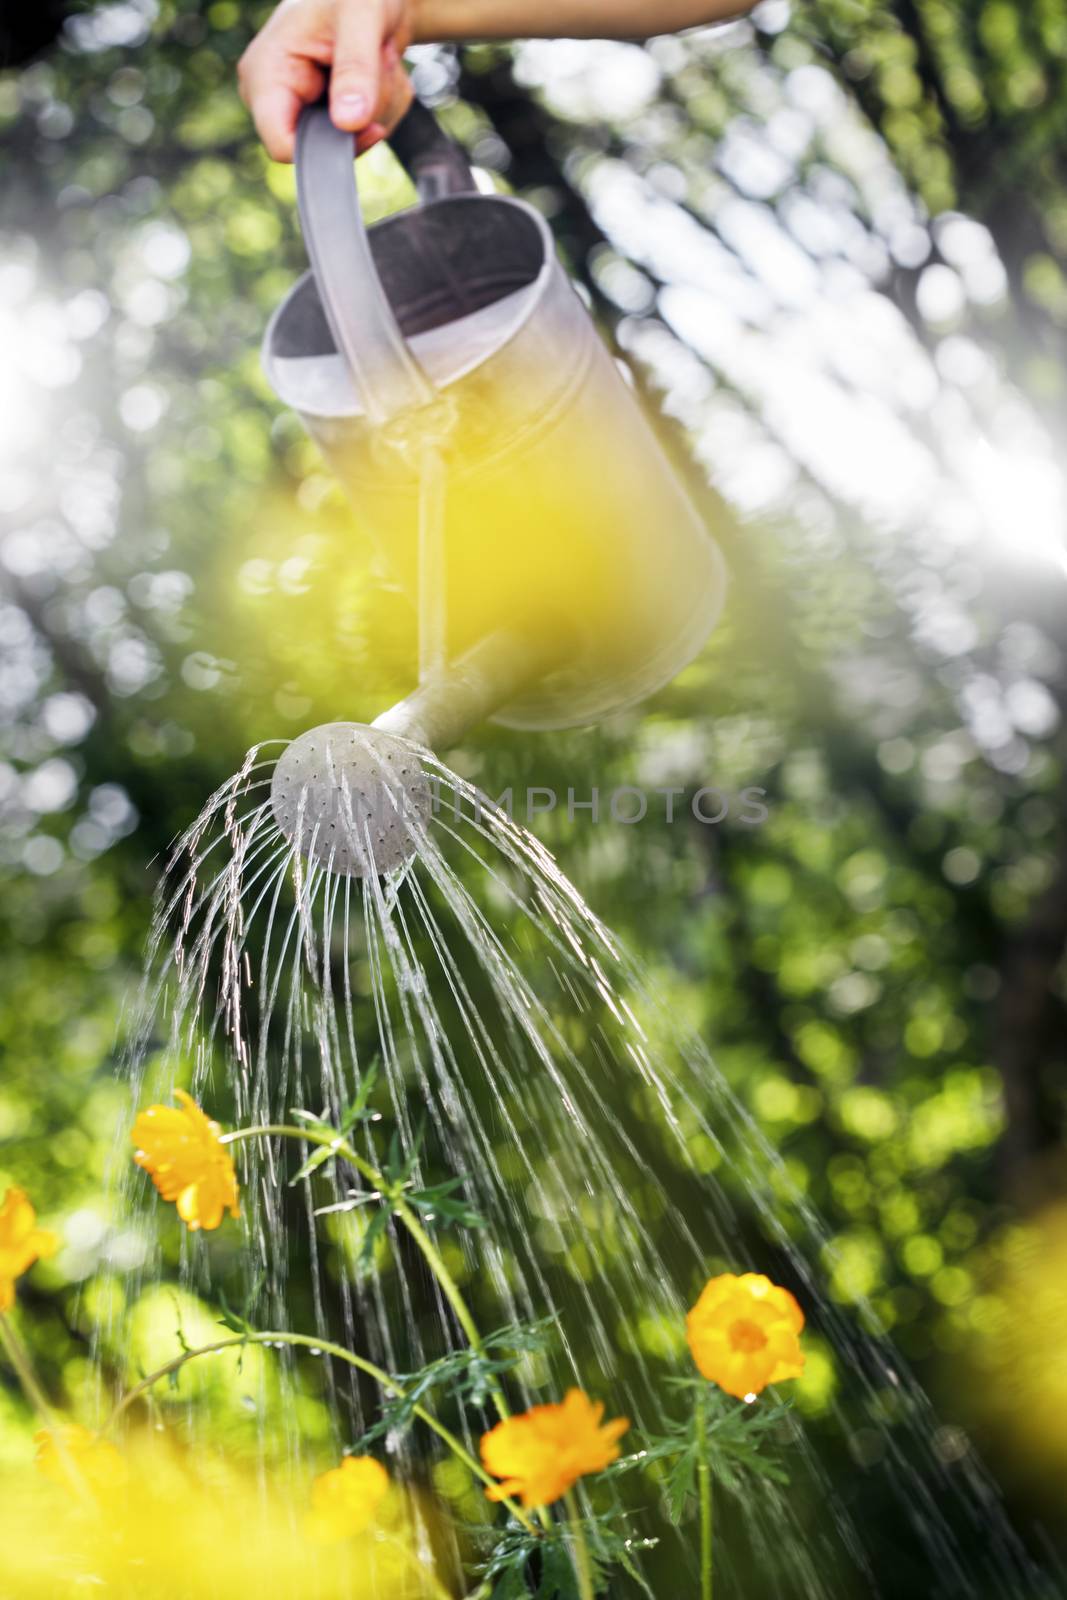 Watering flowers with a metallic watering can. Short depth-of-field, some blurry flowers in the foreground.